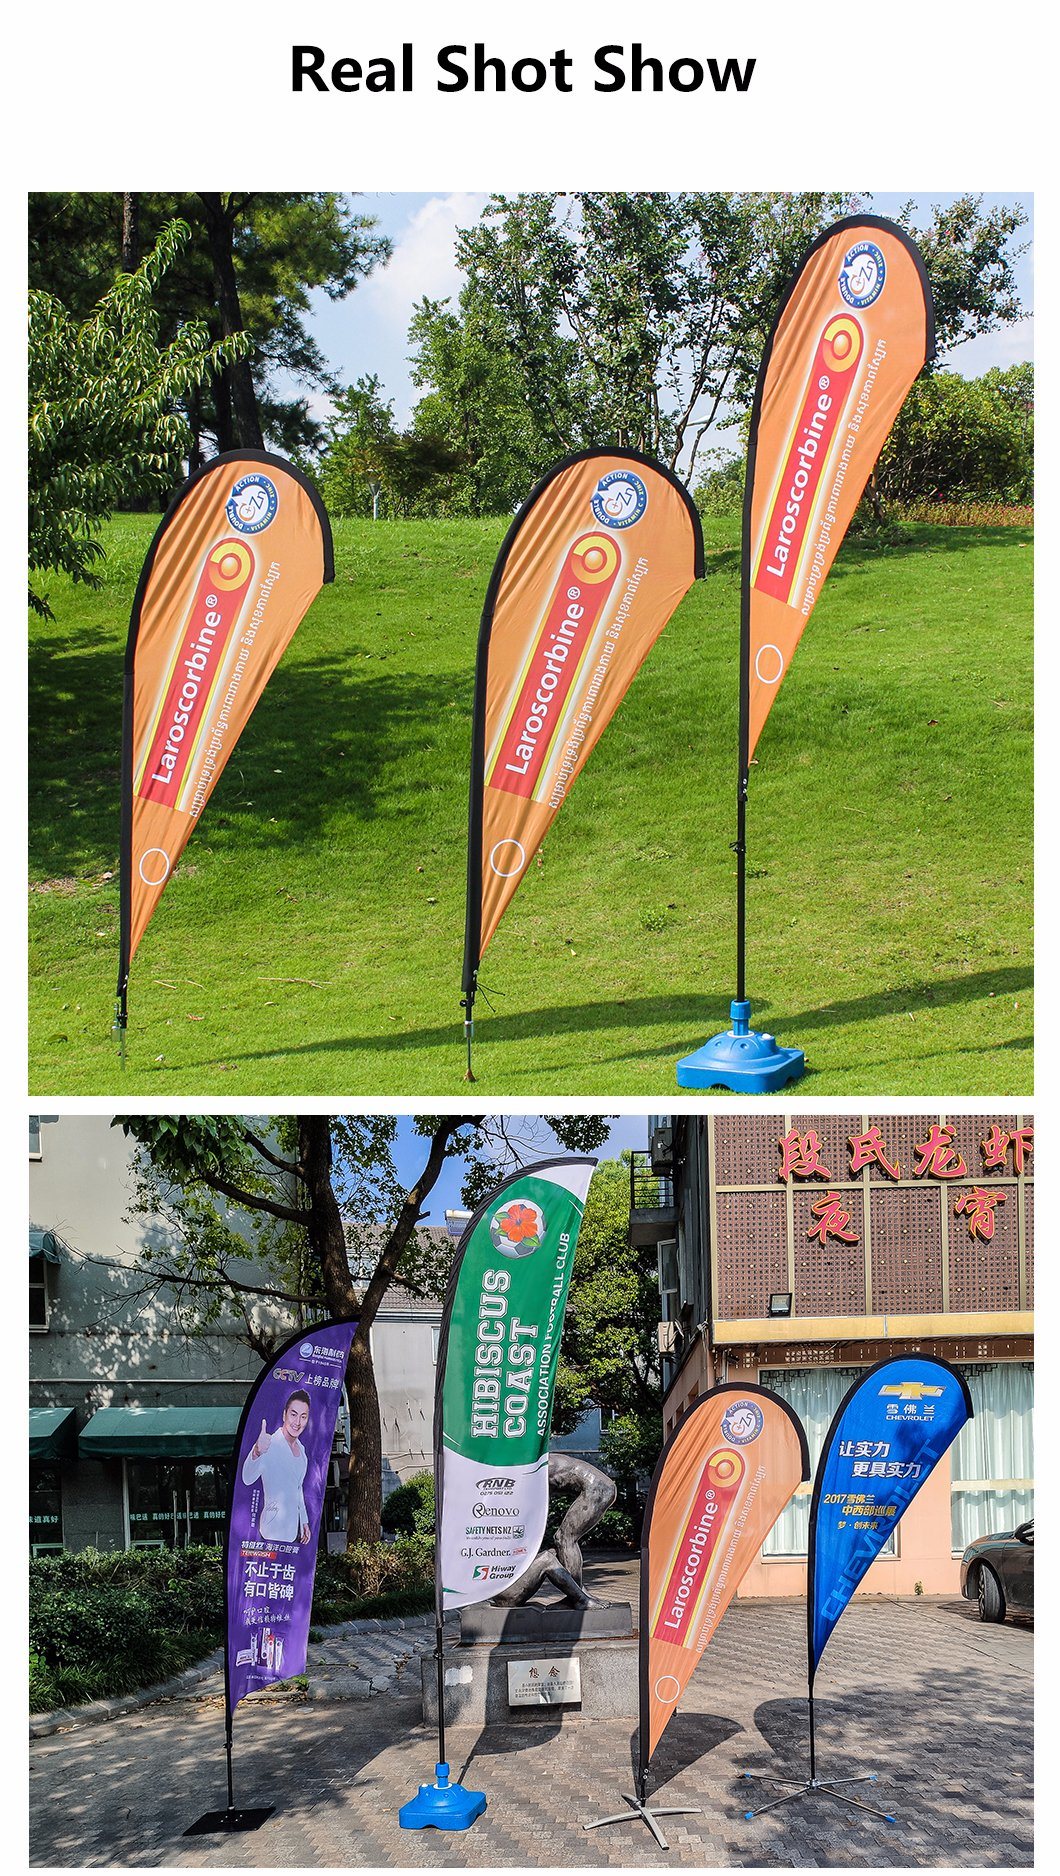 Advertising Trade Show Teardrop Beach Feather Flying Banner Stand Custom Feather Flag Banners